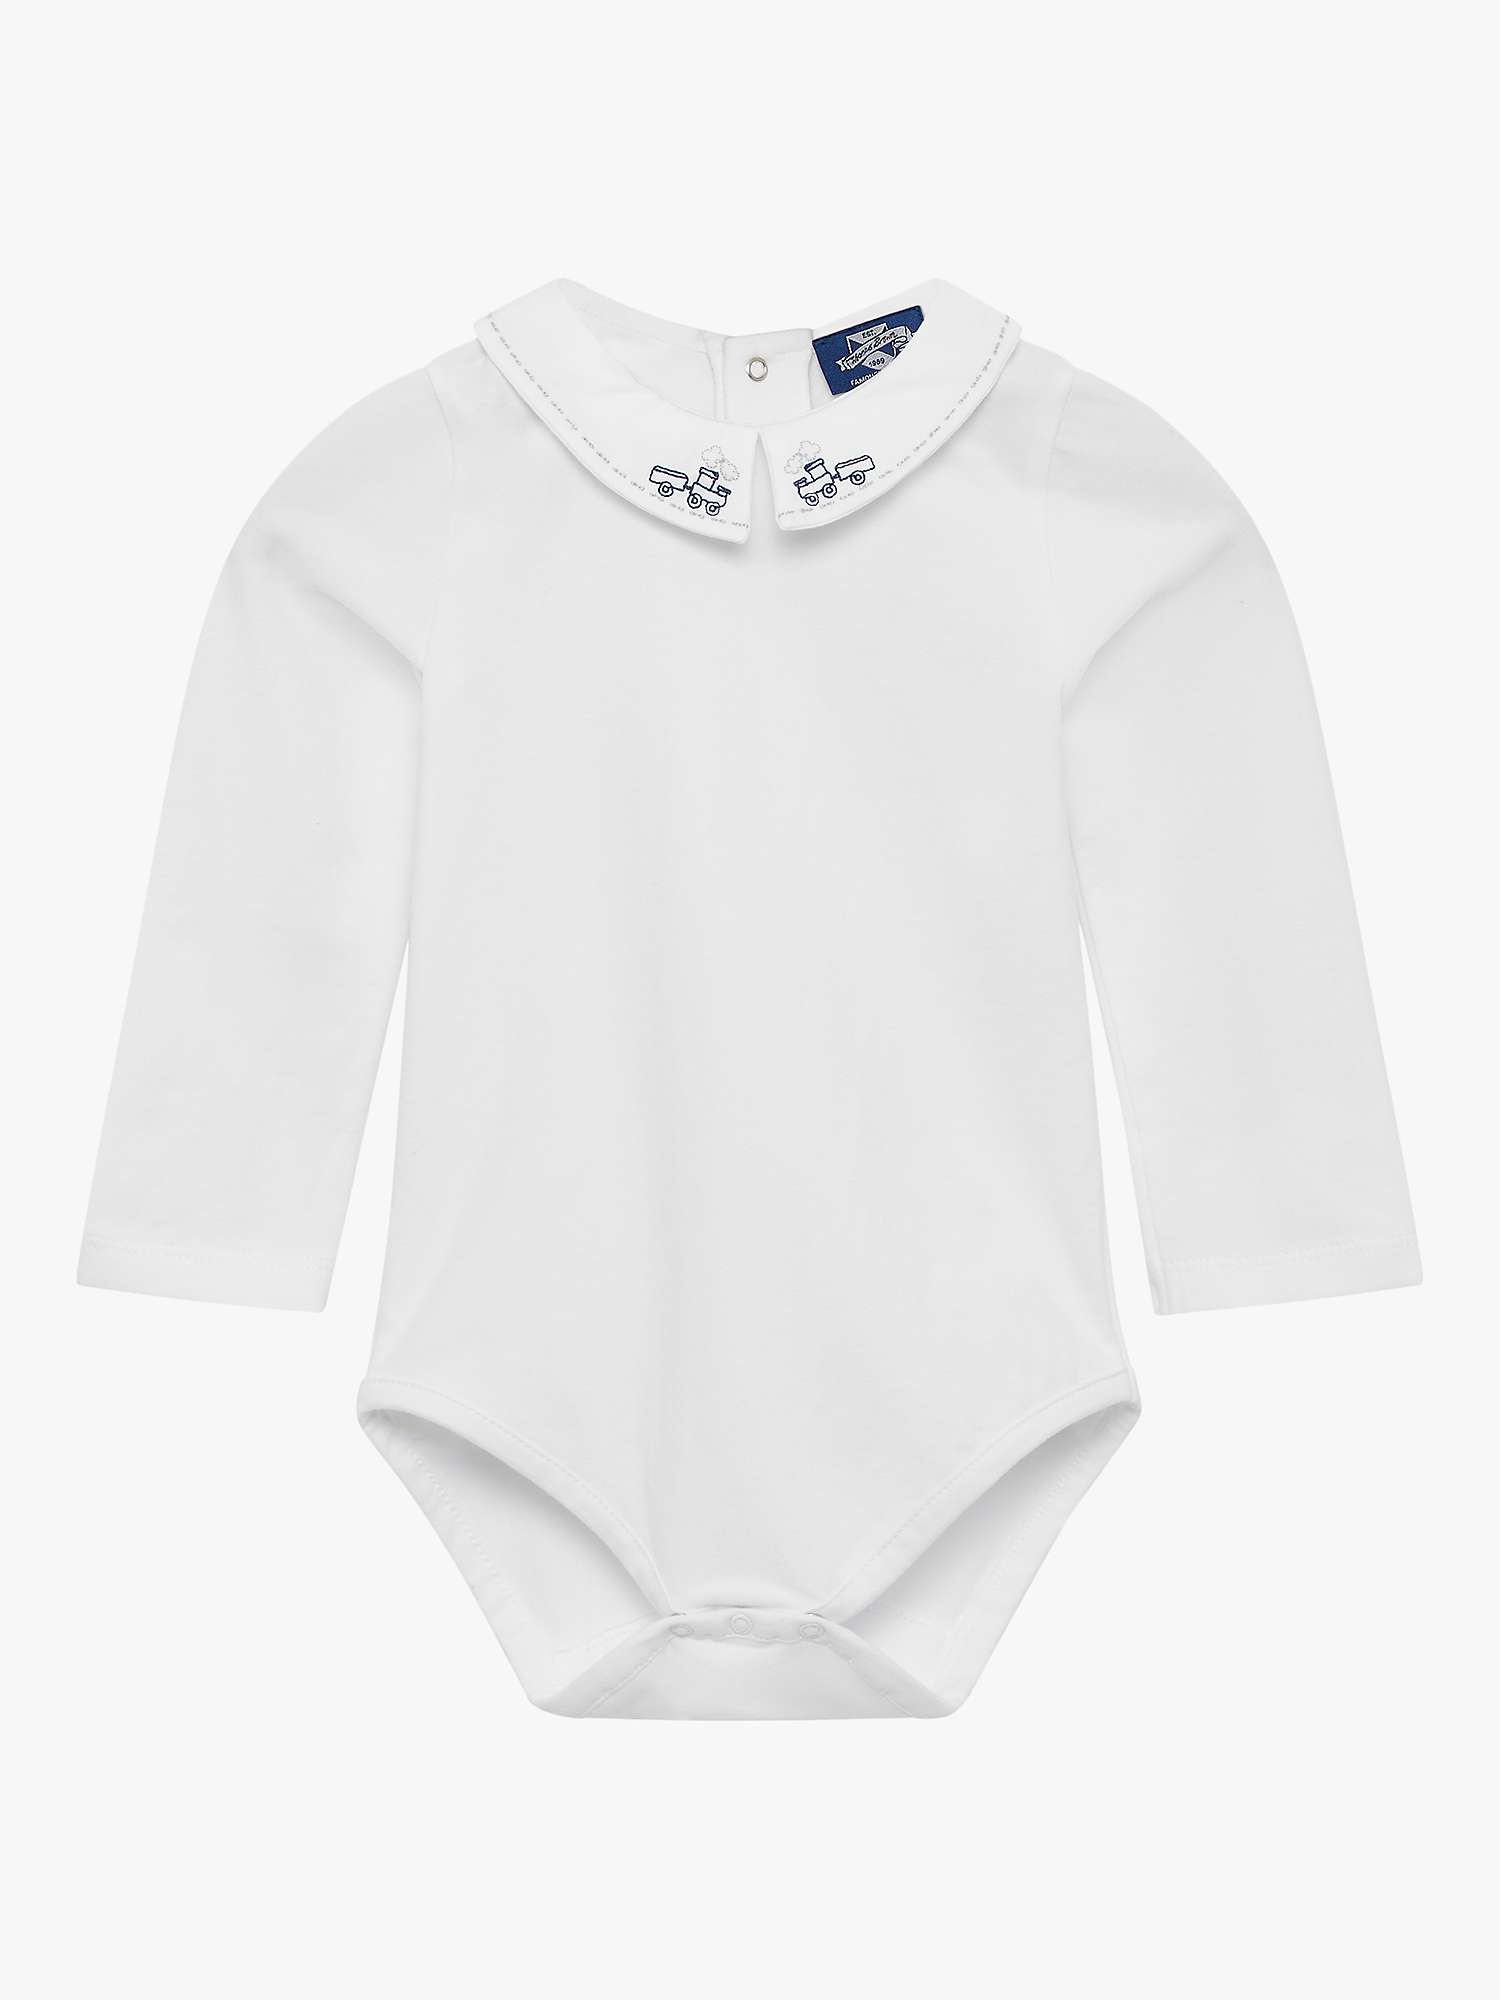 Buy Trotters Thomas Brown Baby Monty Train Jersey Bodysuit, White Online at johnlewis.com